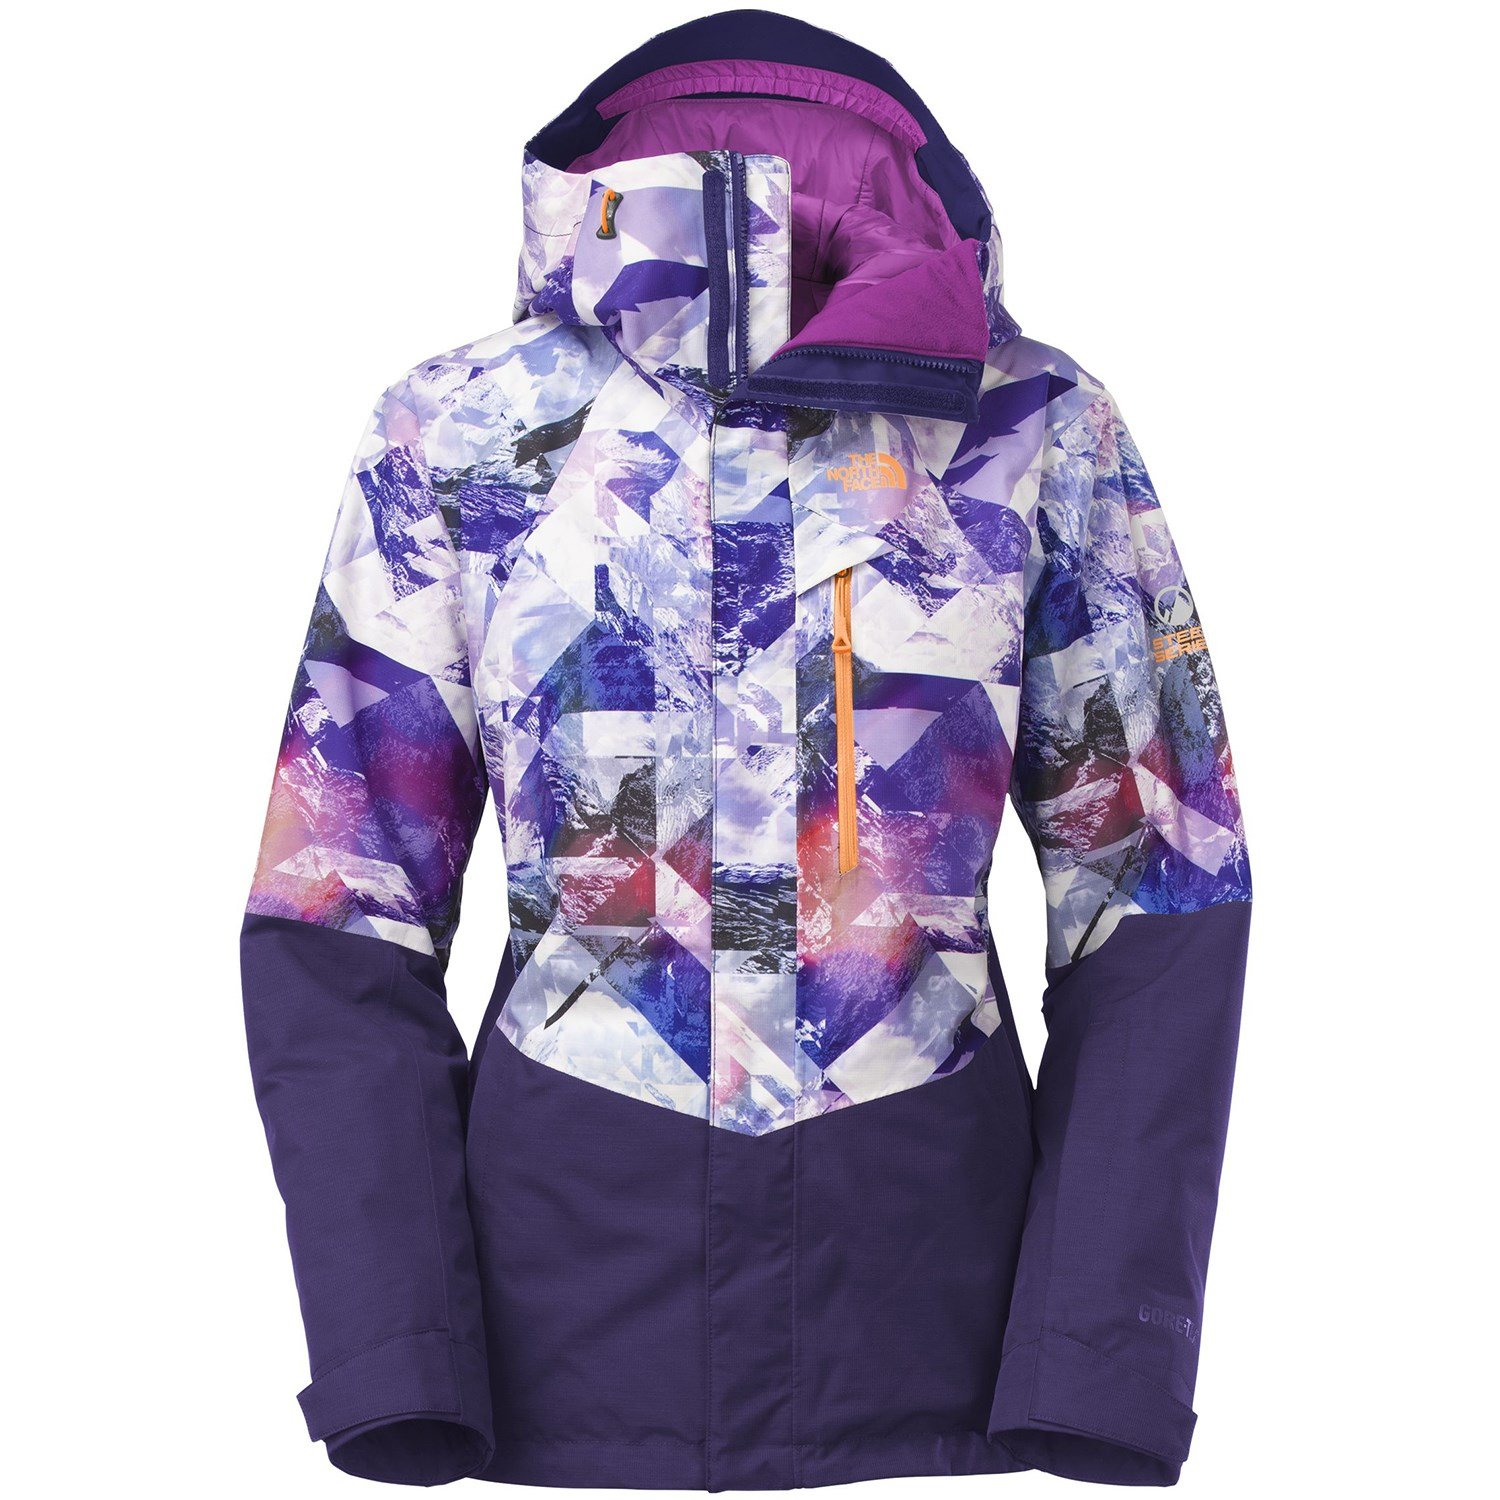 north face parka womens sale